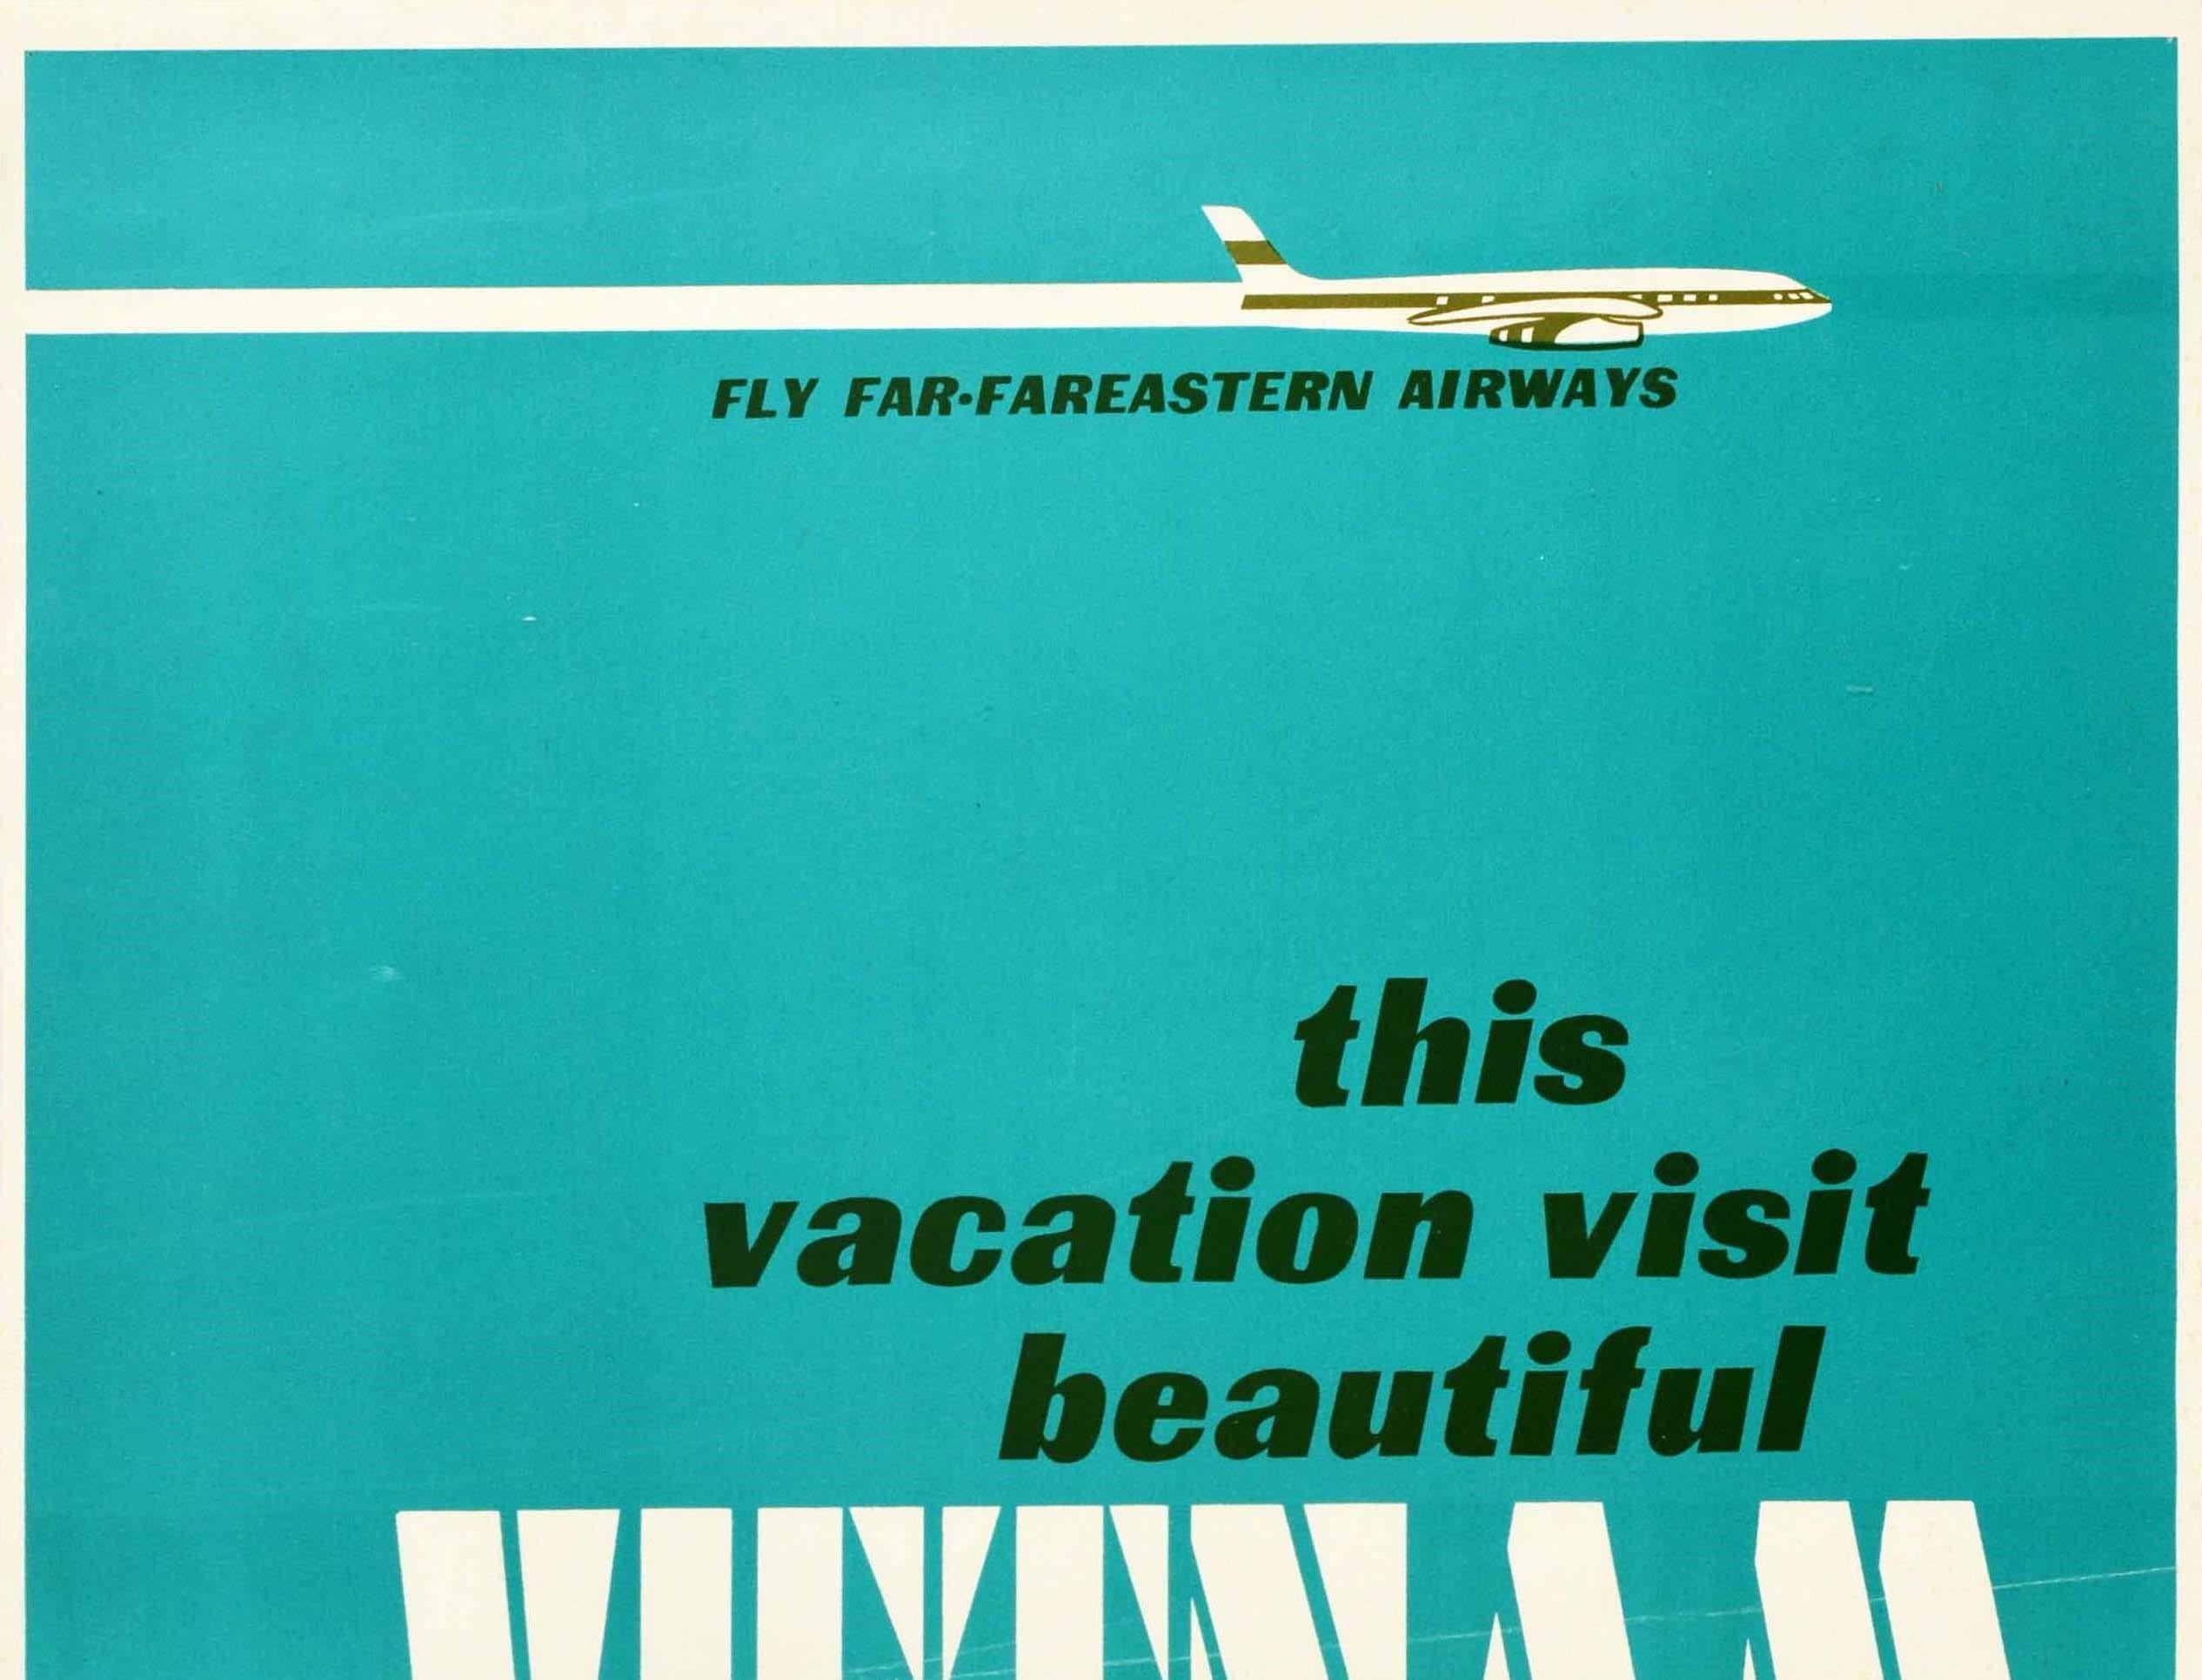 Original vintage anti-war political poster criticising the Vietnam War (1955-1975): Fly Far-FarEastern Airways this vacation visit beautiful Vietnam styled in a satirical travel poster design featuring a plane flying across the top of the poster